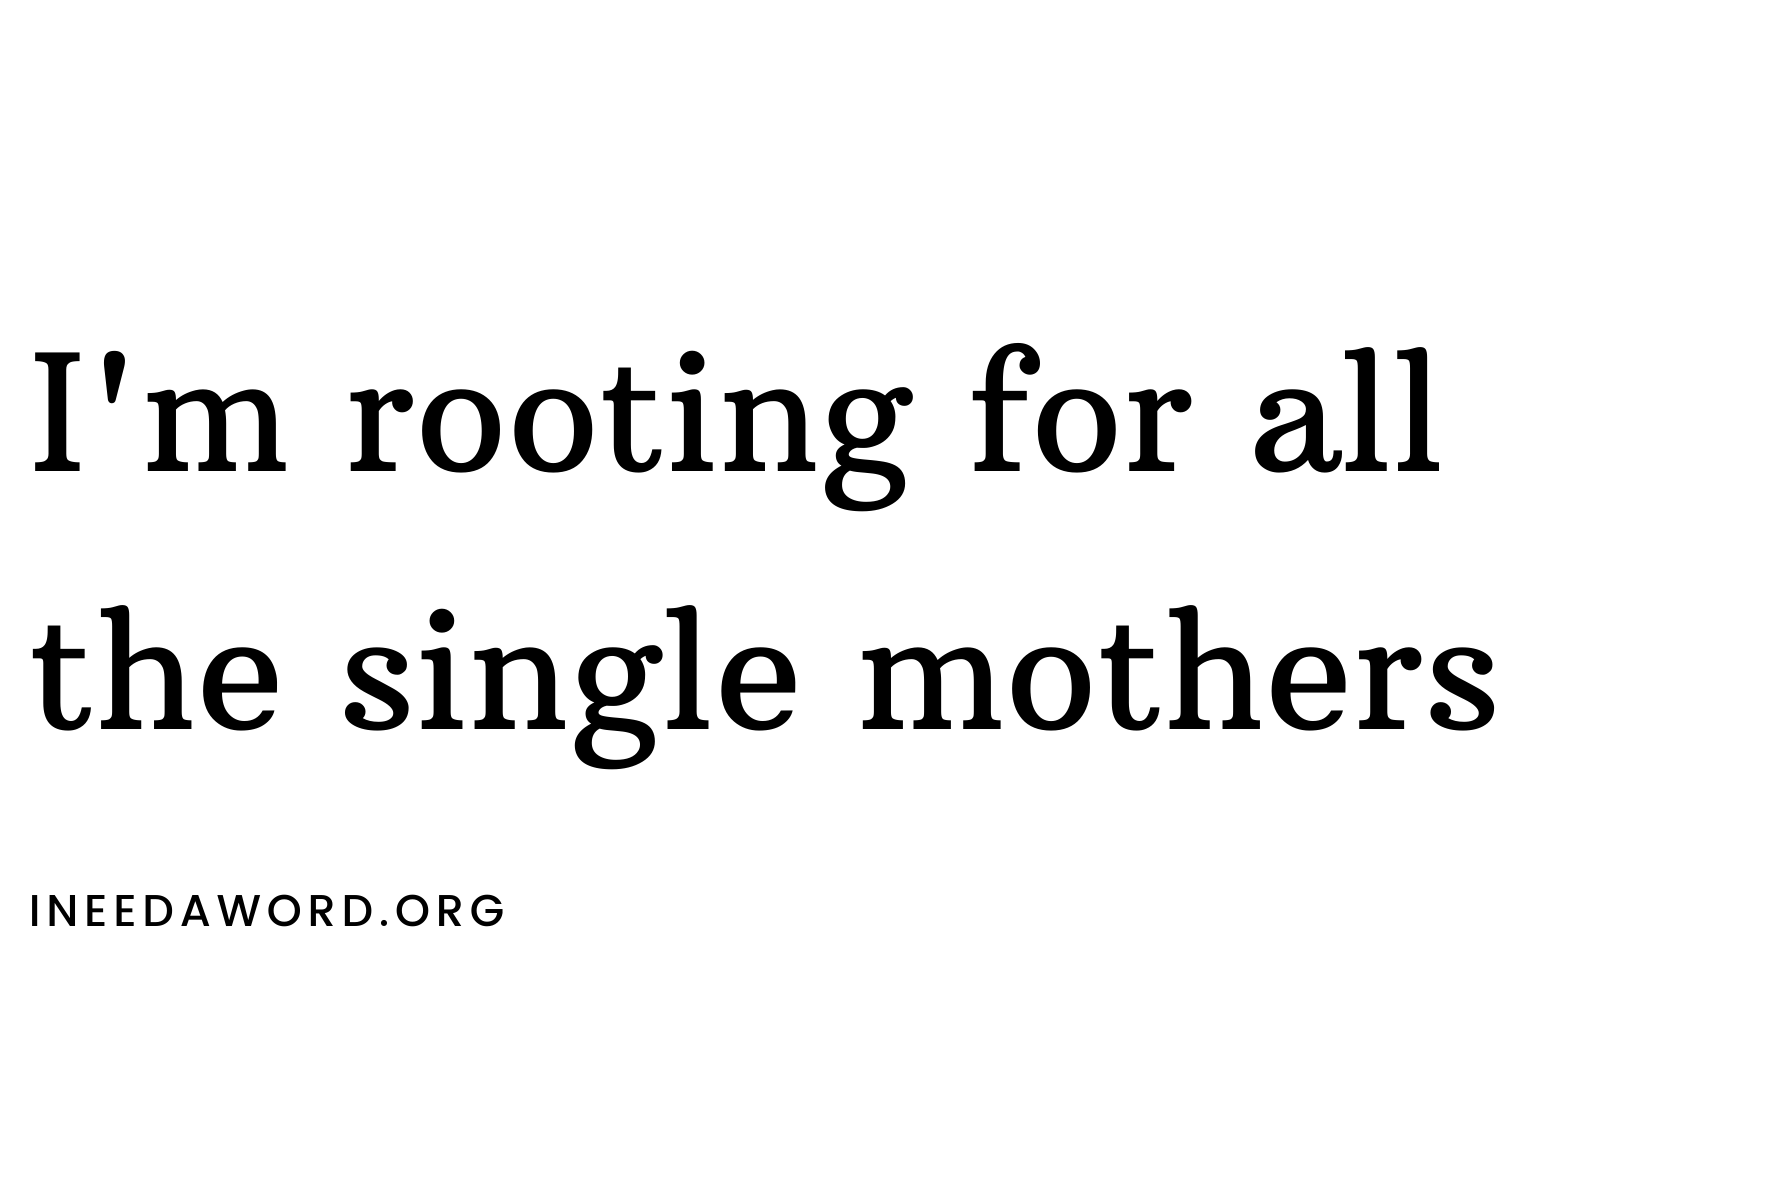 I’m rooting for all the single mothers